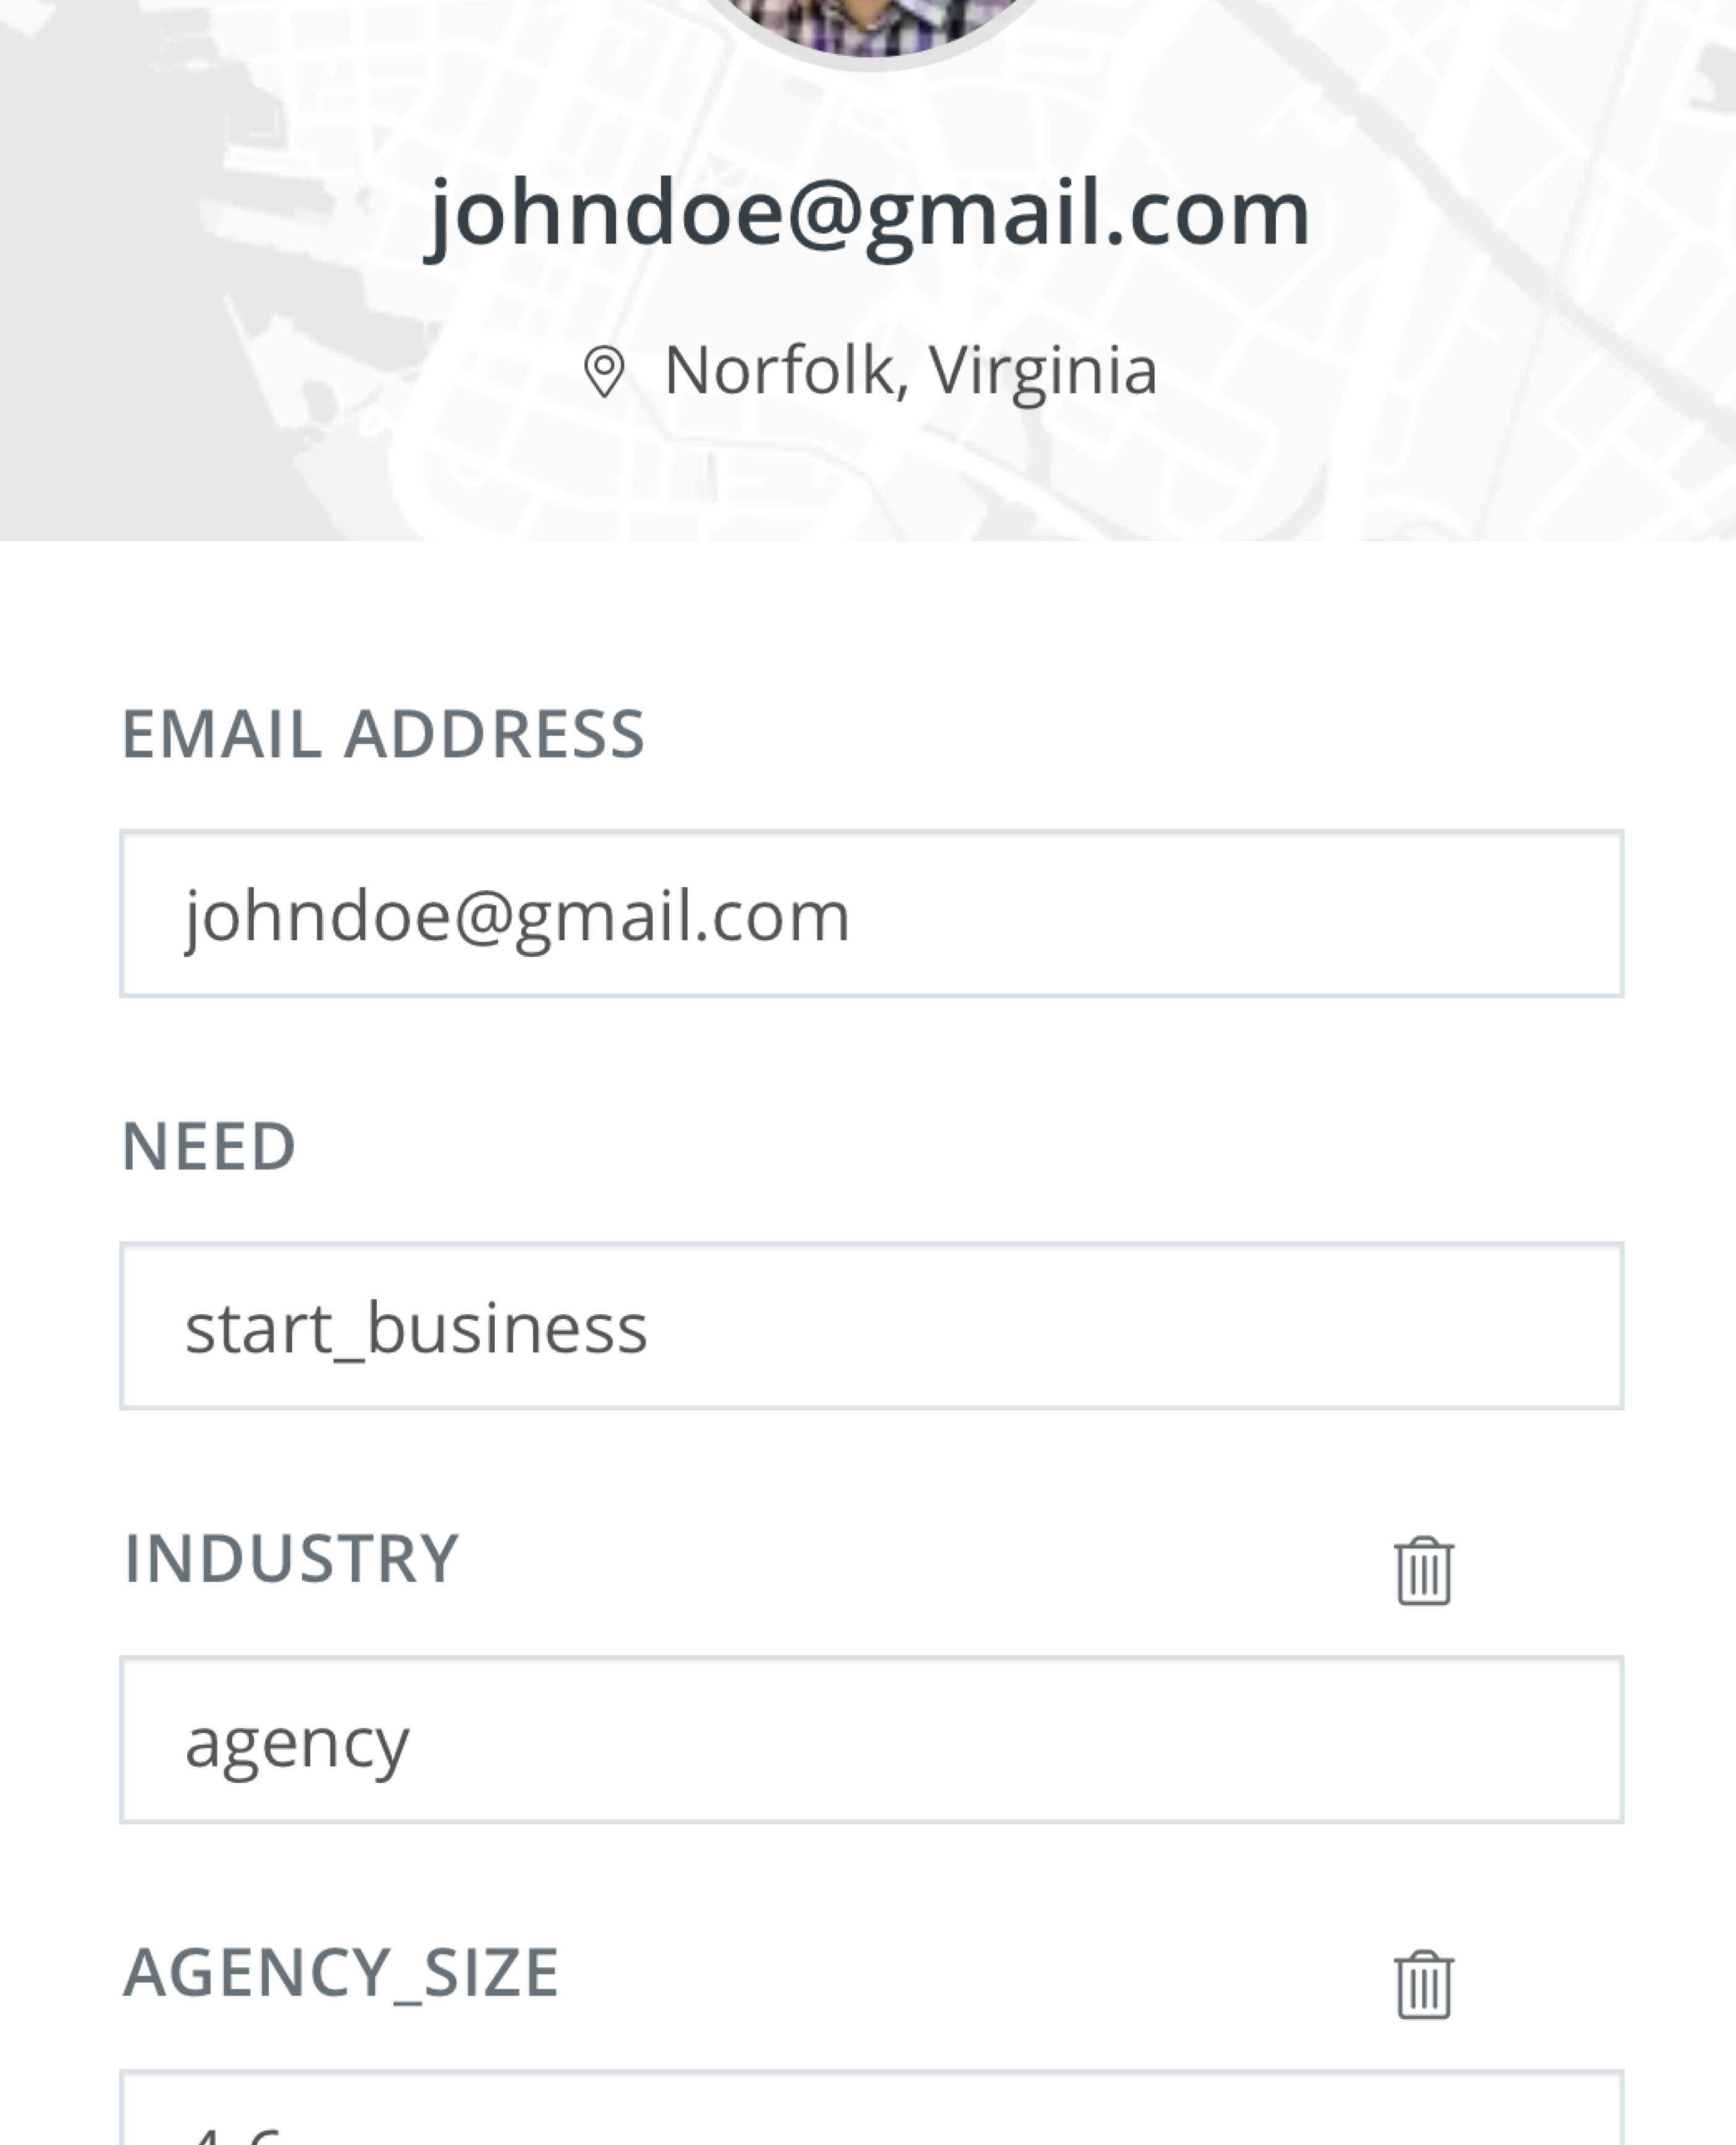 Email list subscribers are automatically identified